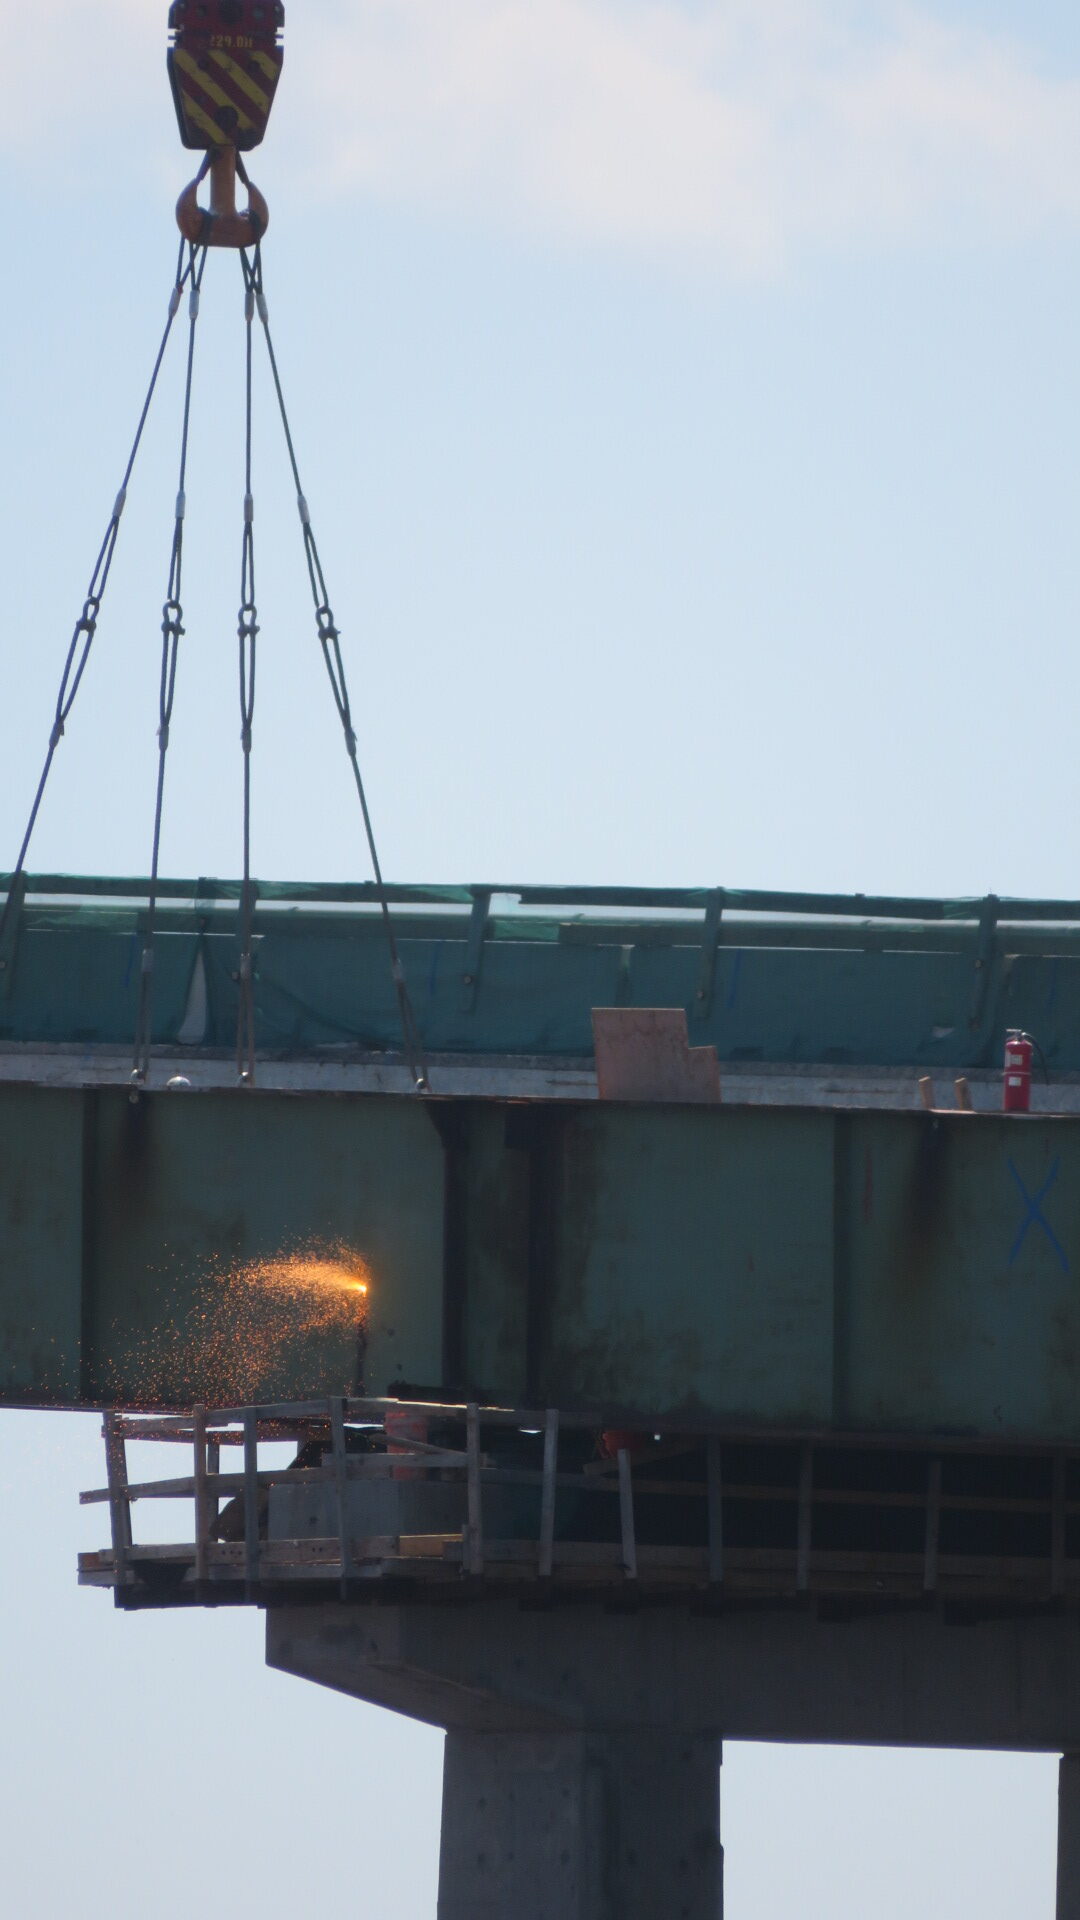 Expanded view, torch cutting the 5th girder section